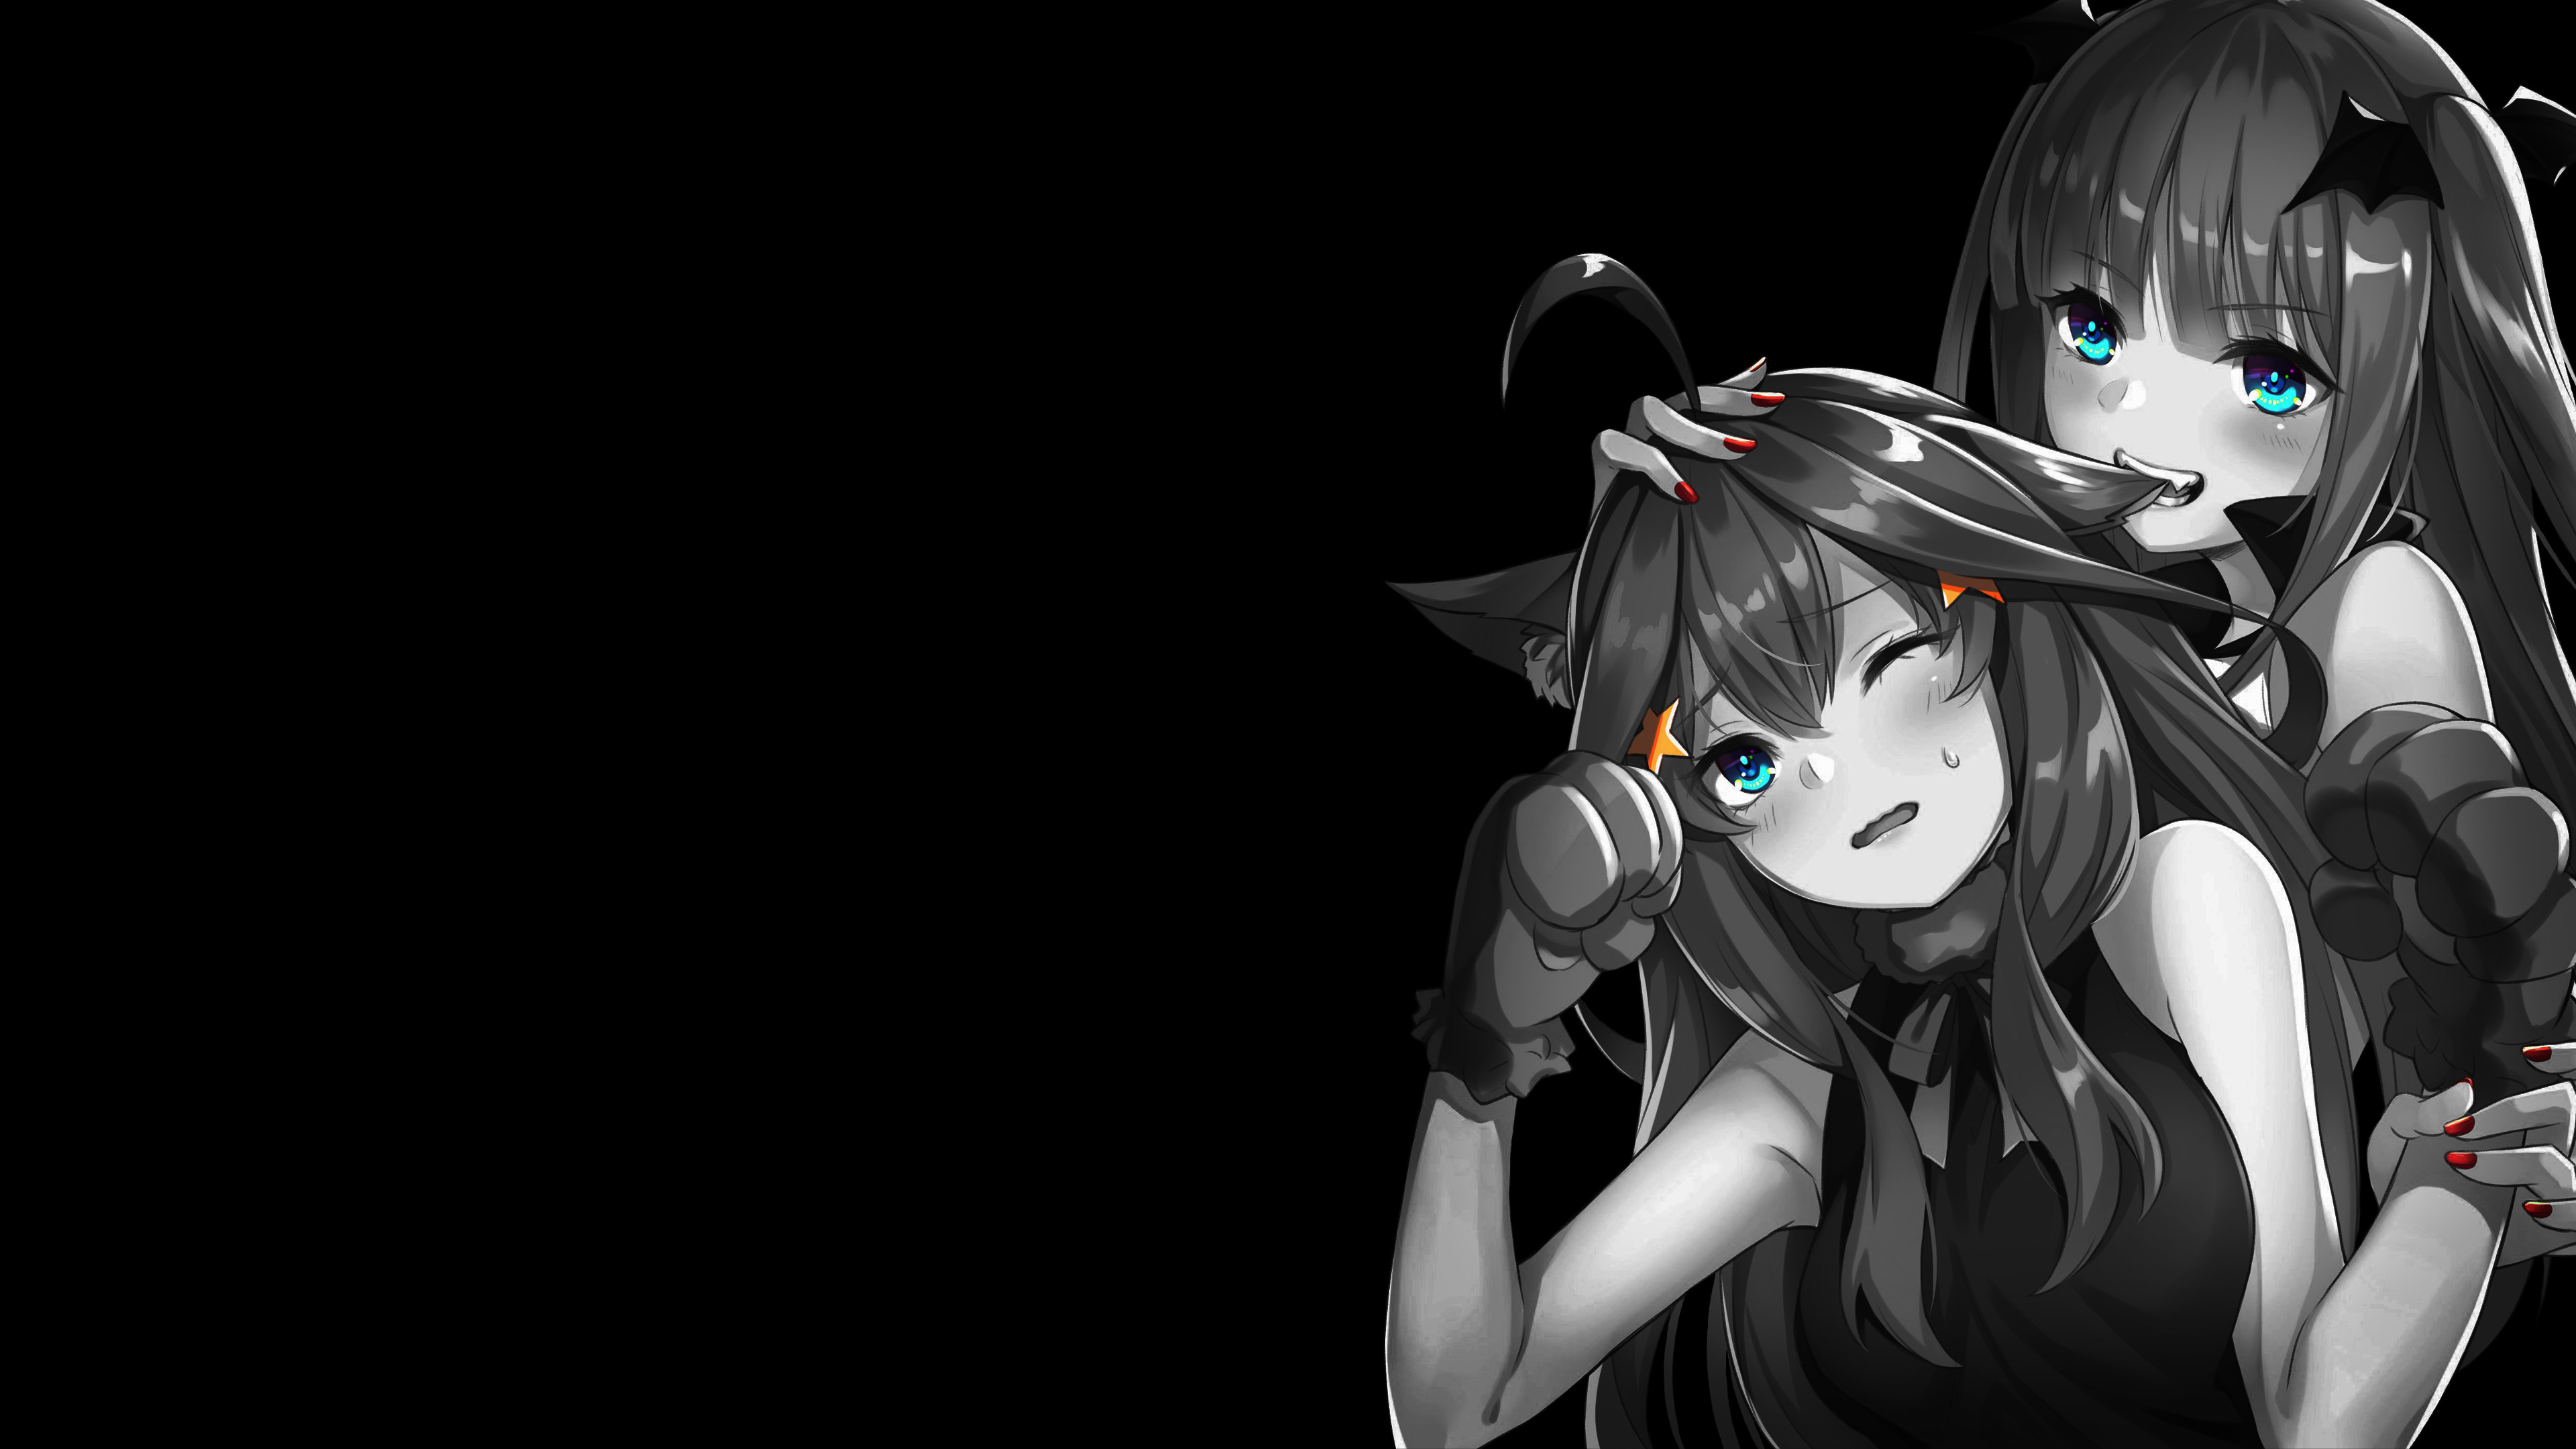 Anime 3840x2160 simple background dark background black background selective coloring anime girls